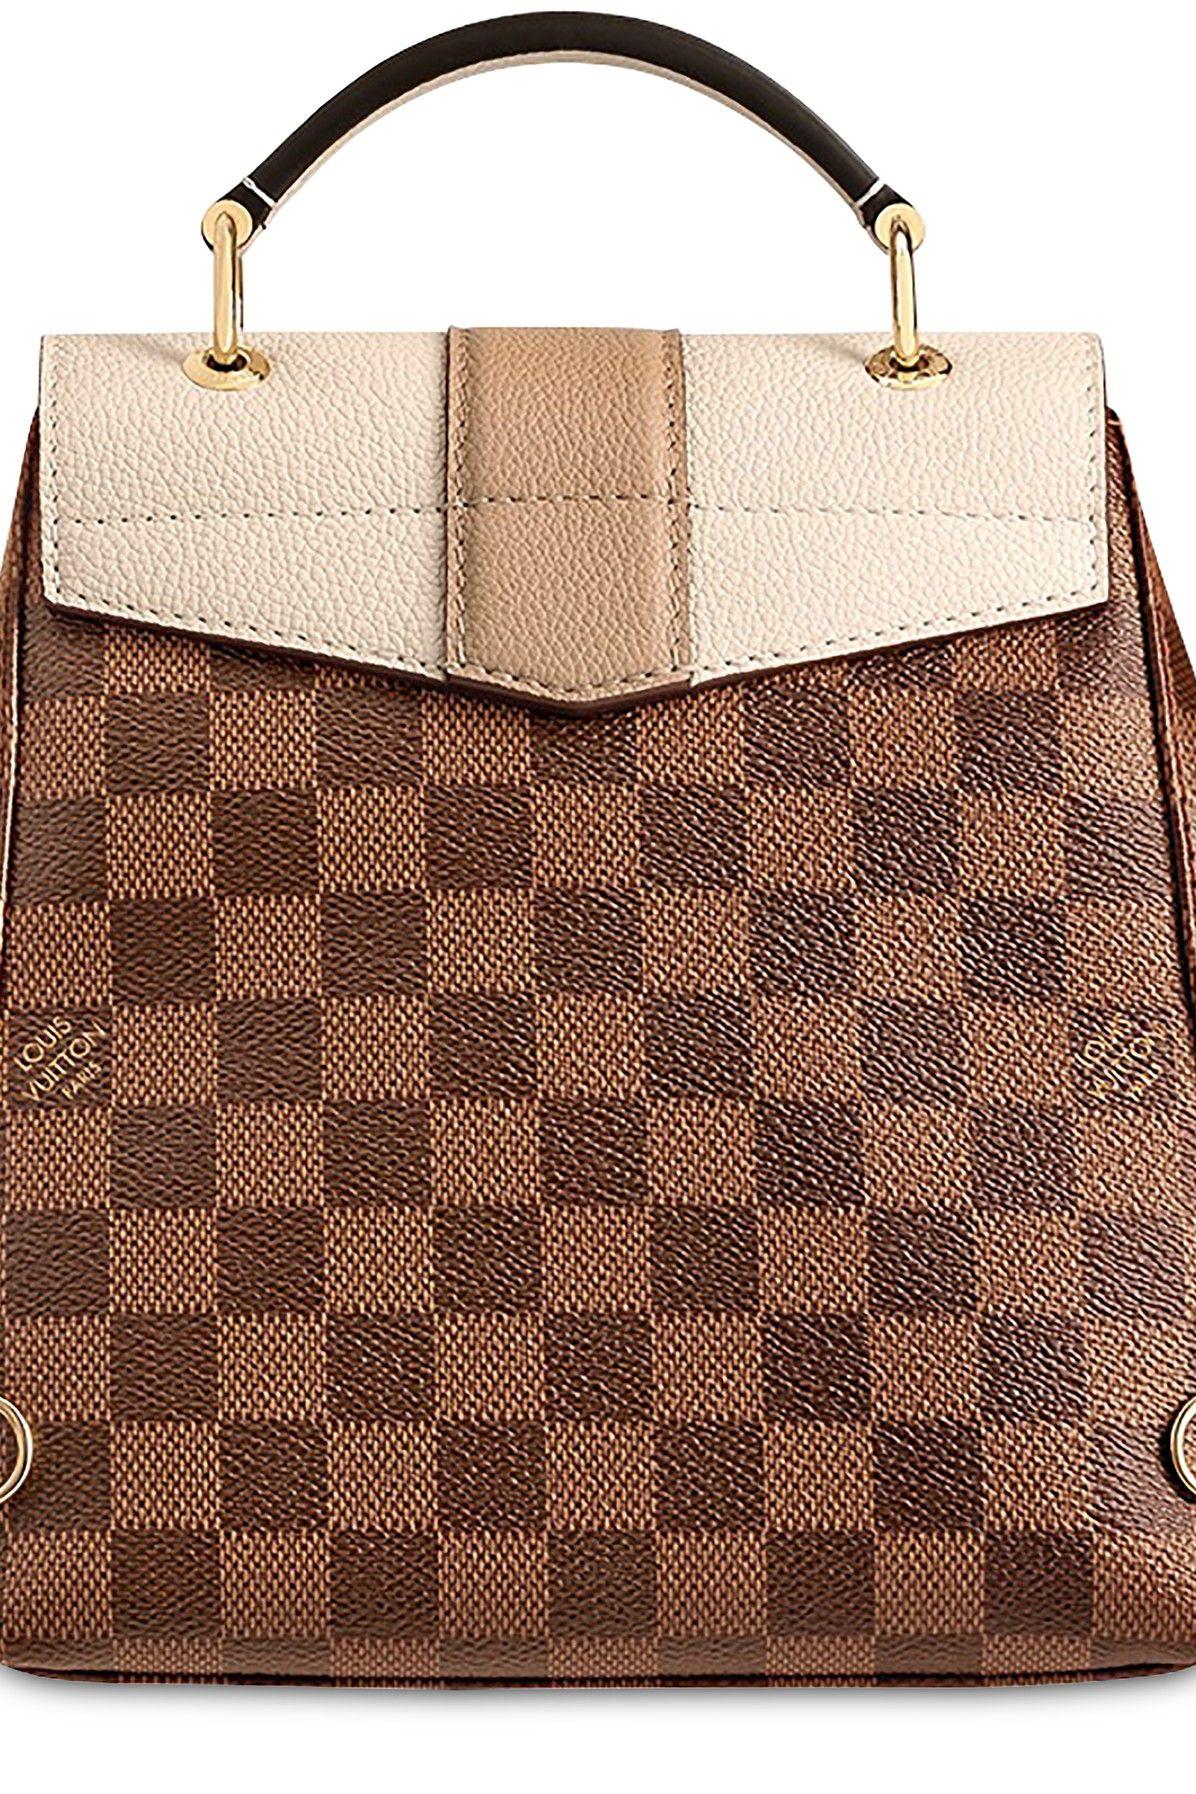 Louis Vuitton Clapton Backpack Damier and Leather Brown 2305507